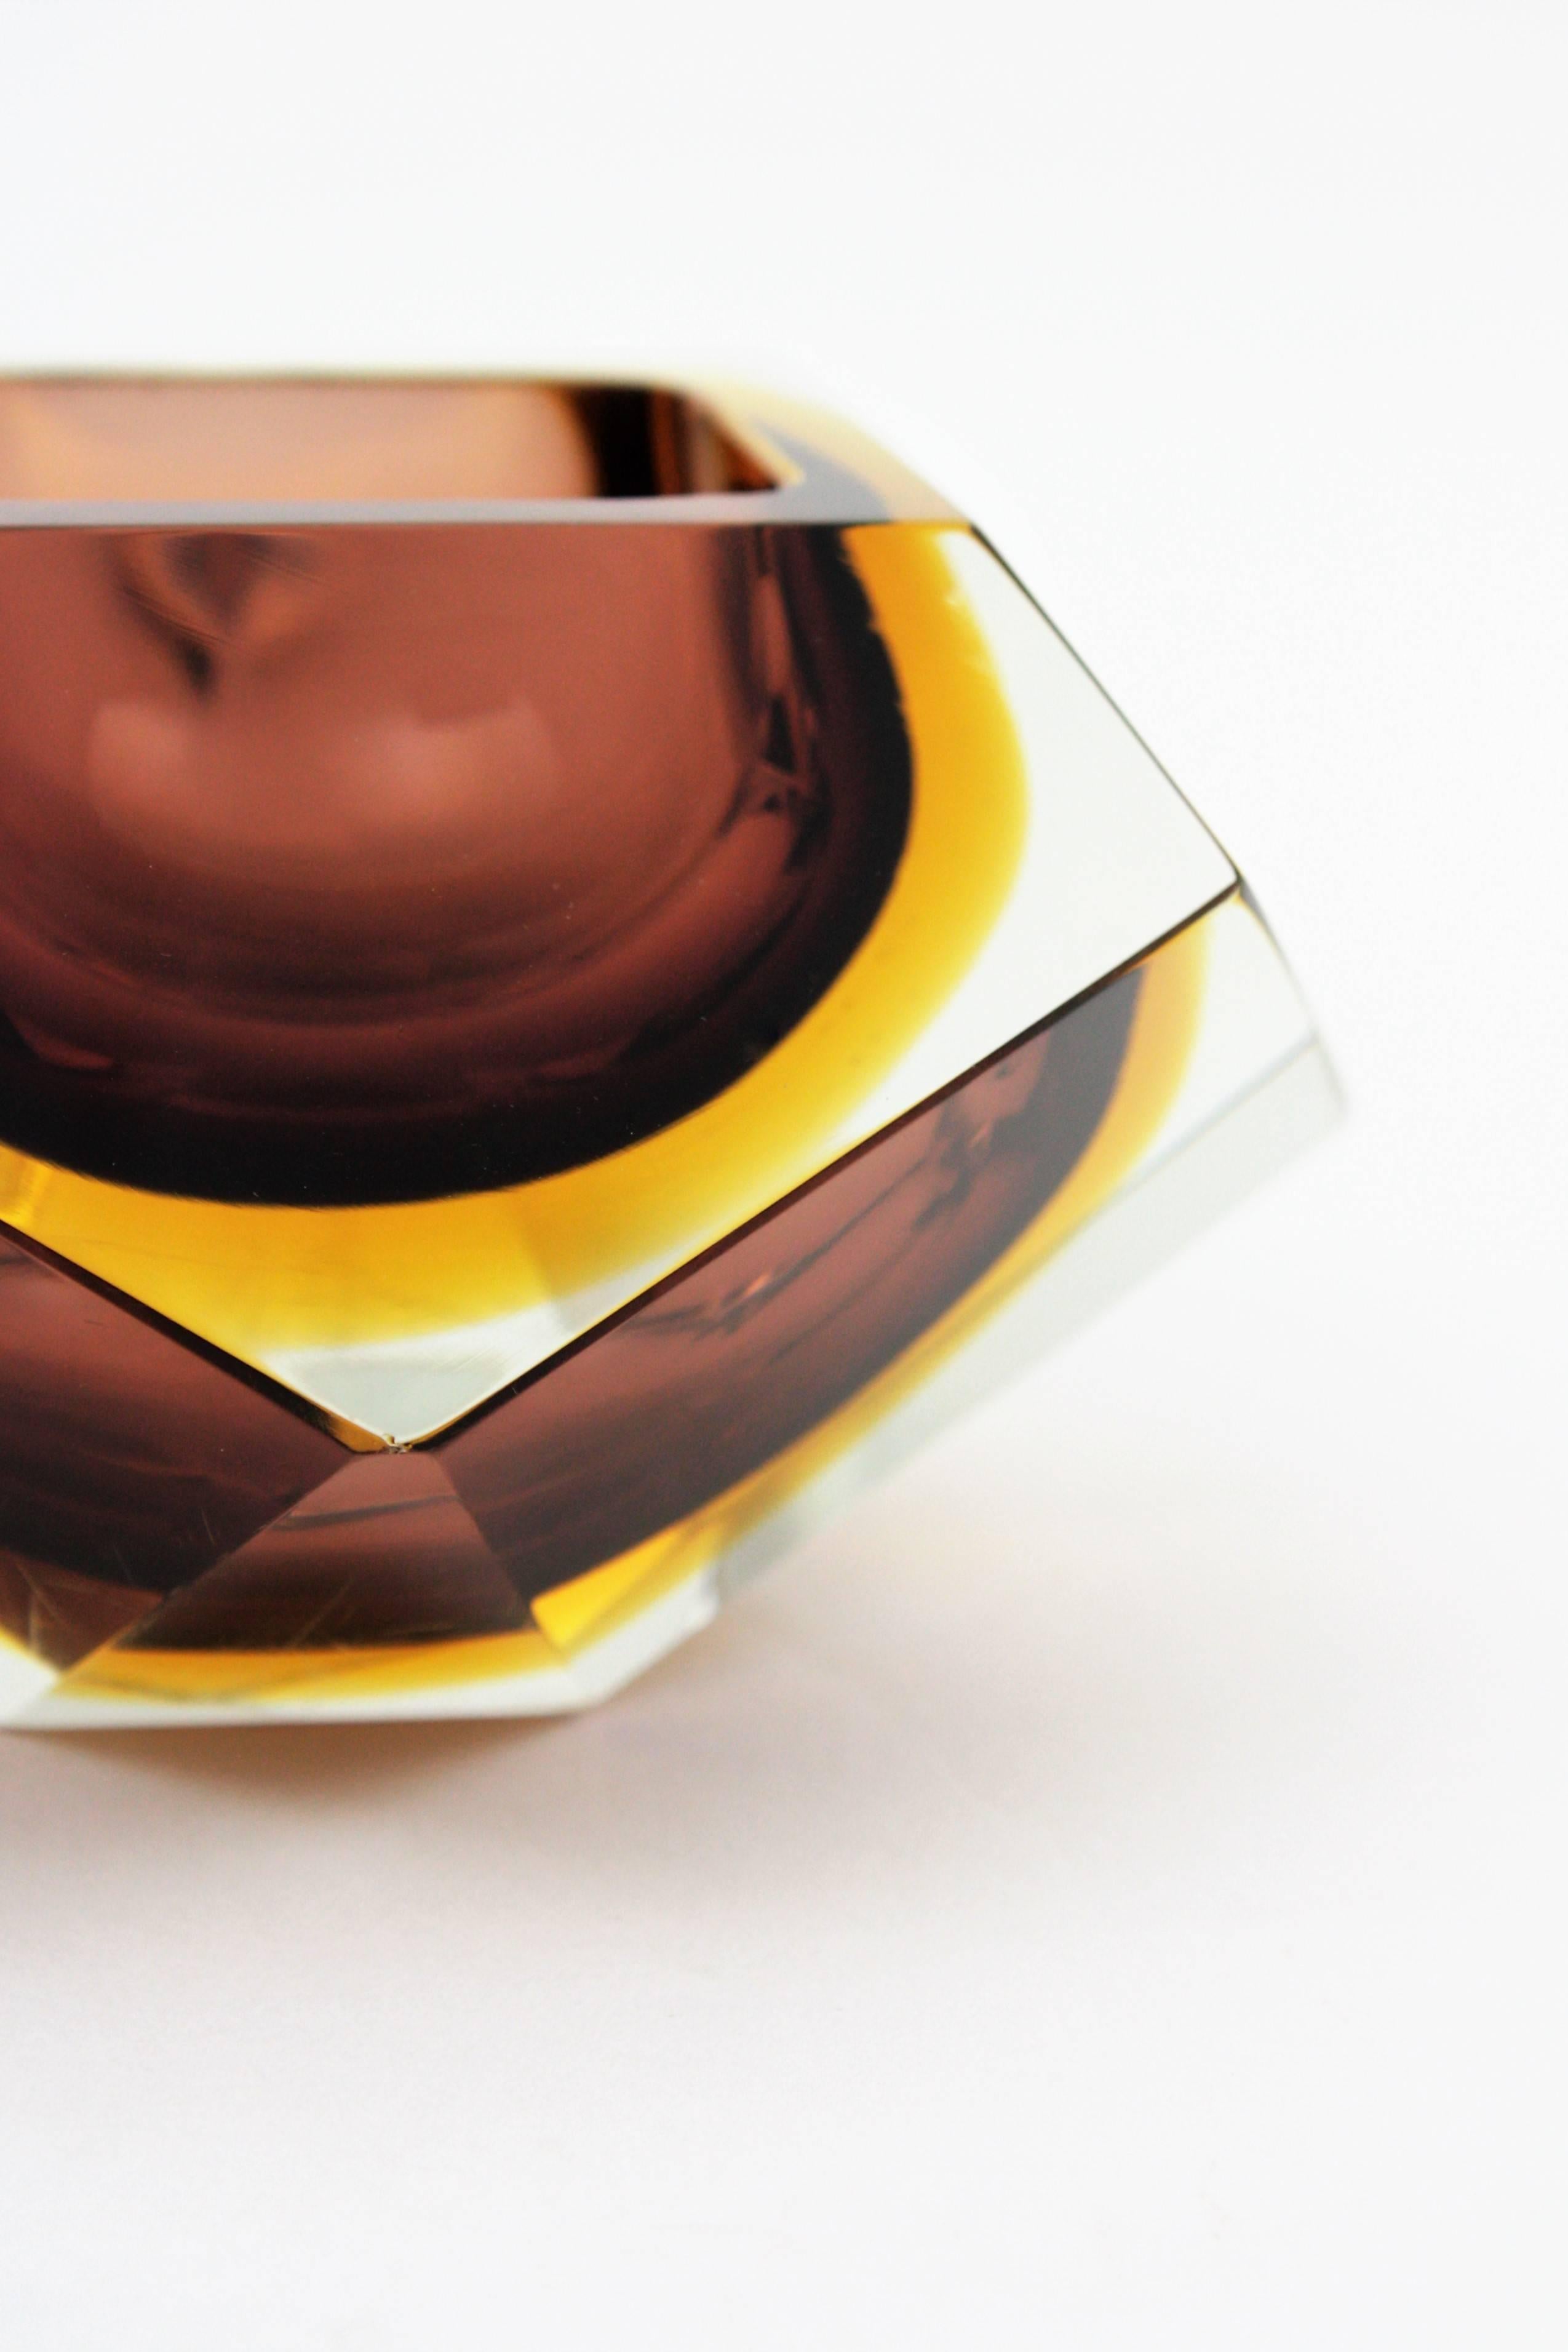 Large Flavio Poli Brown & Amber Sommerso Diamond Shape Faceted Murano Glass Bowl 3